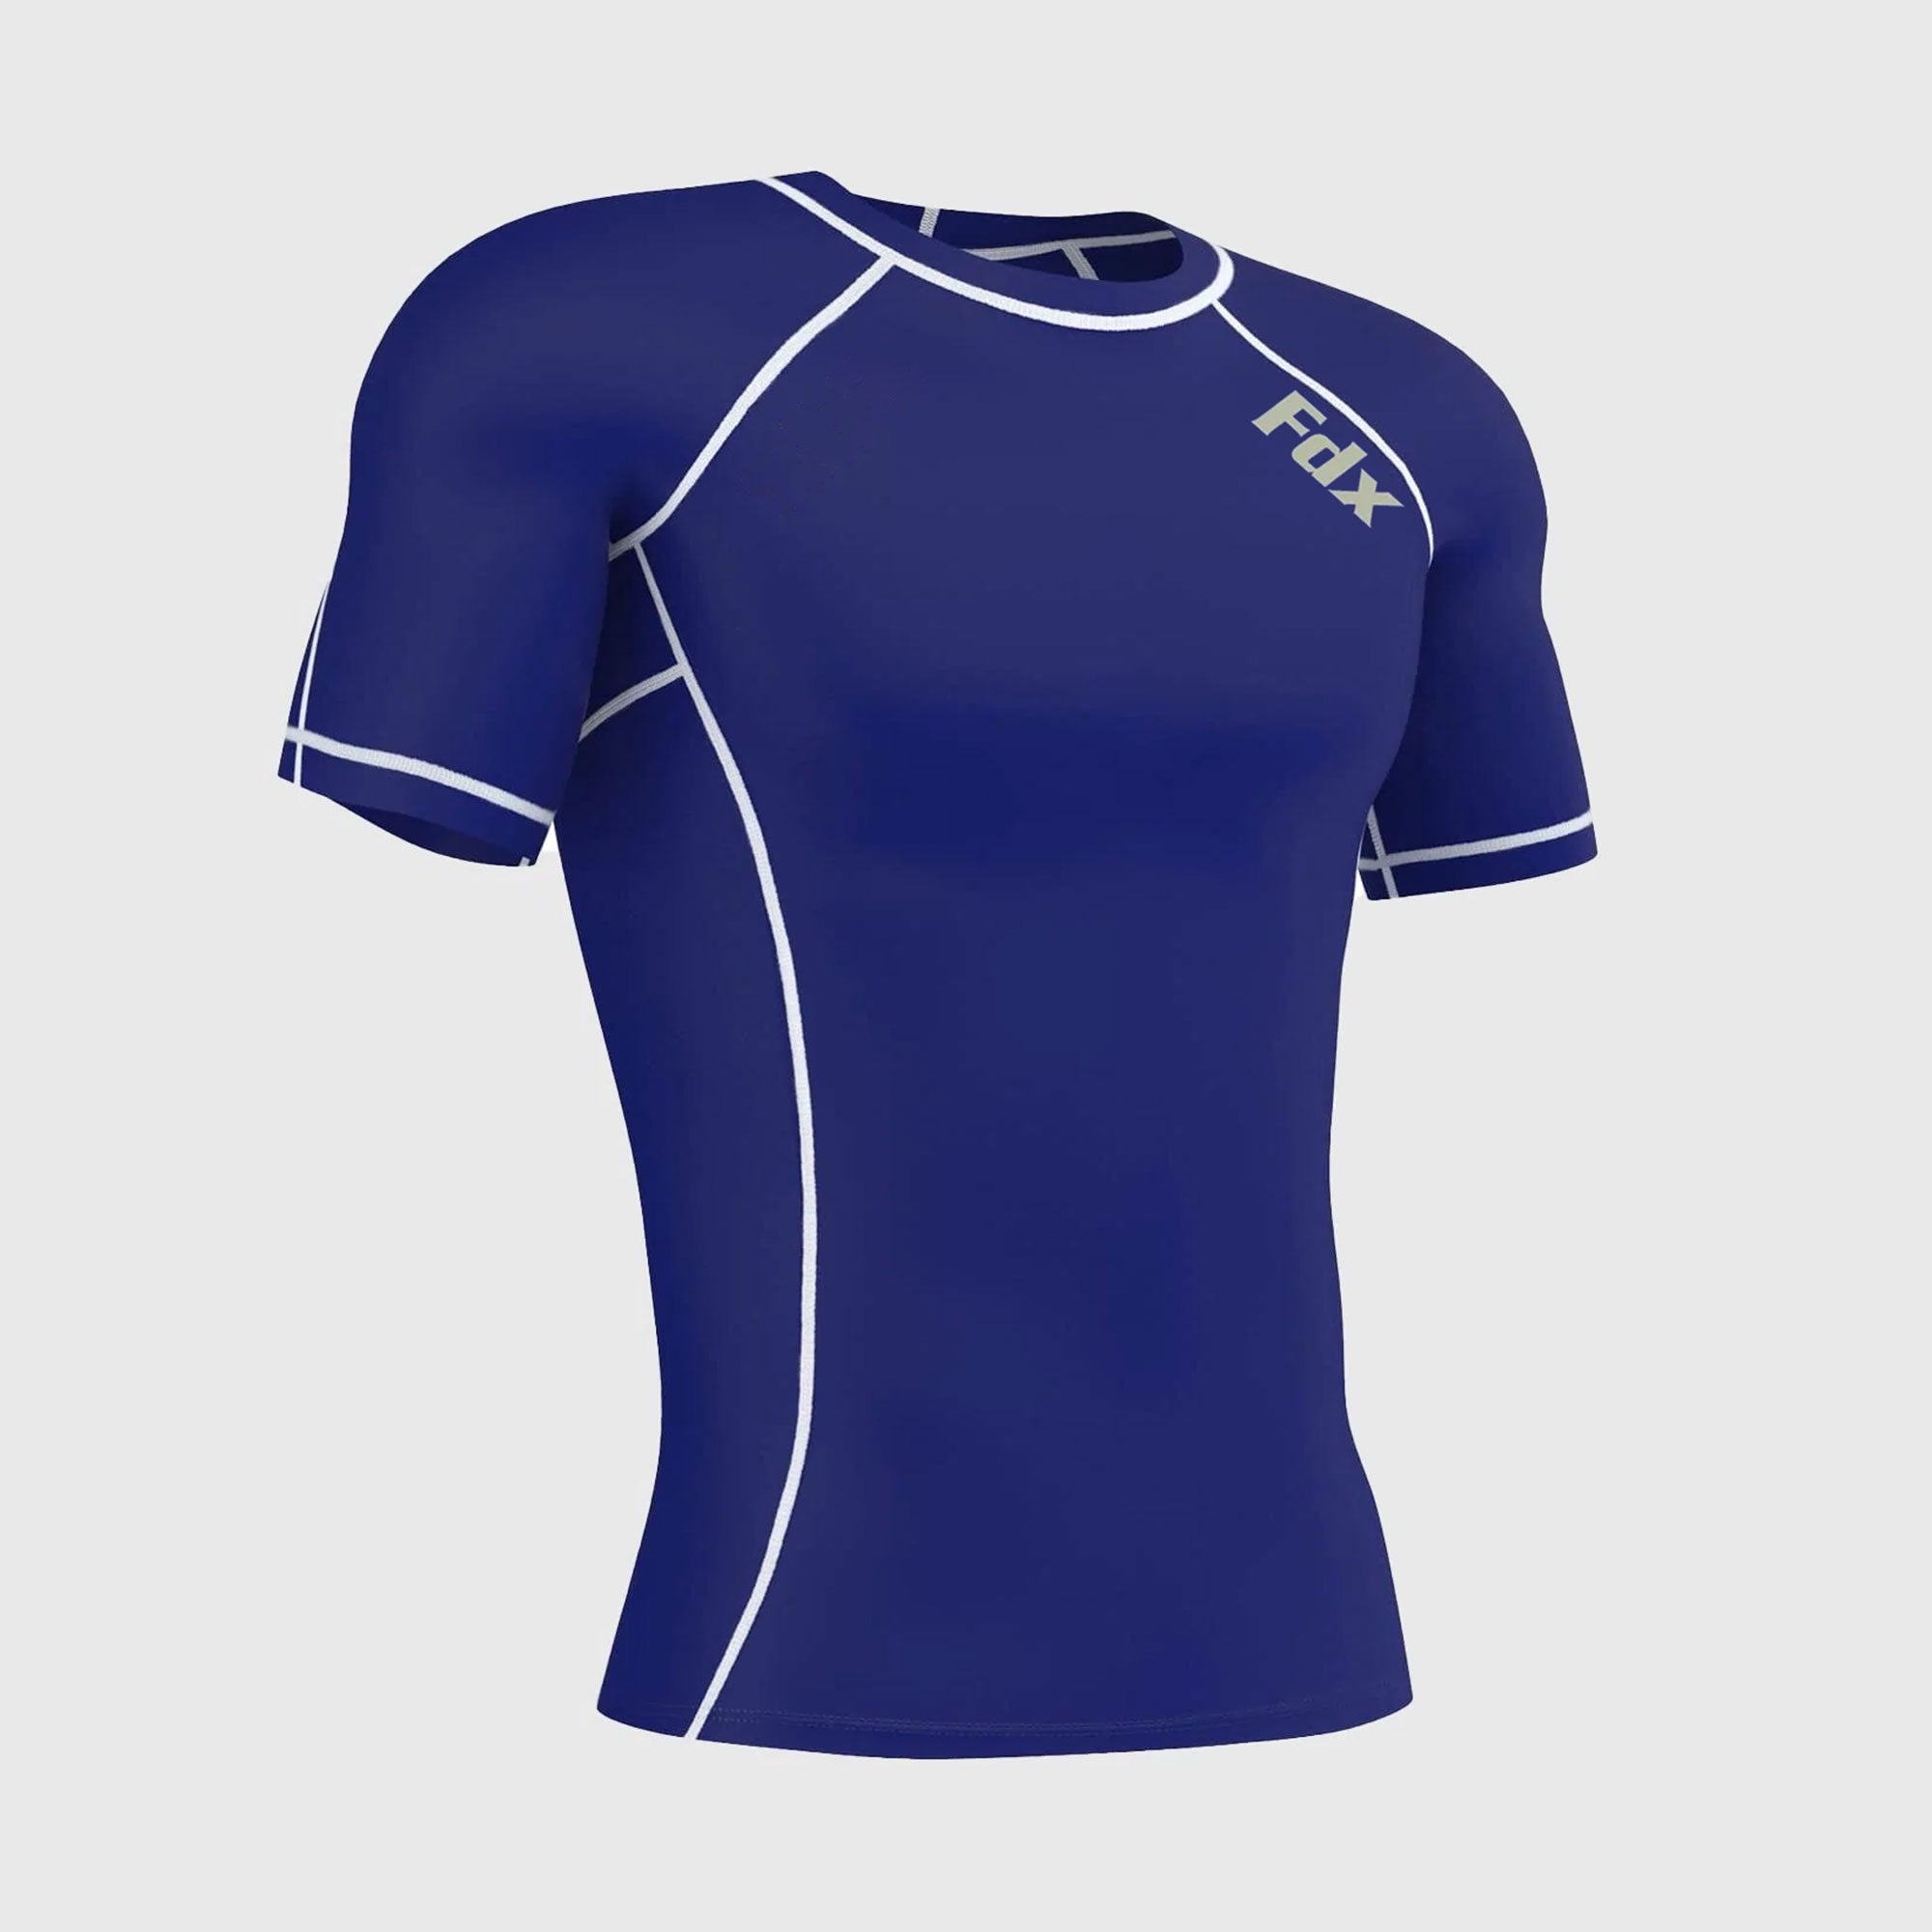 Related: Blue Men 1 Sleeveless Compression Top